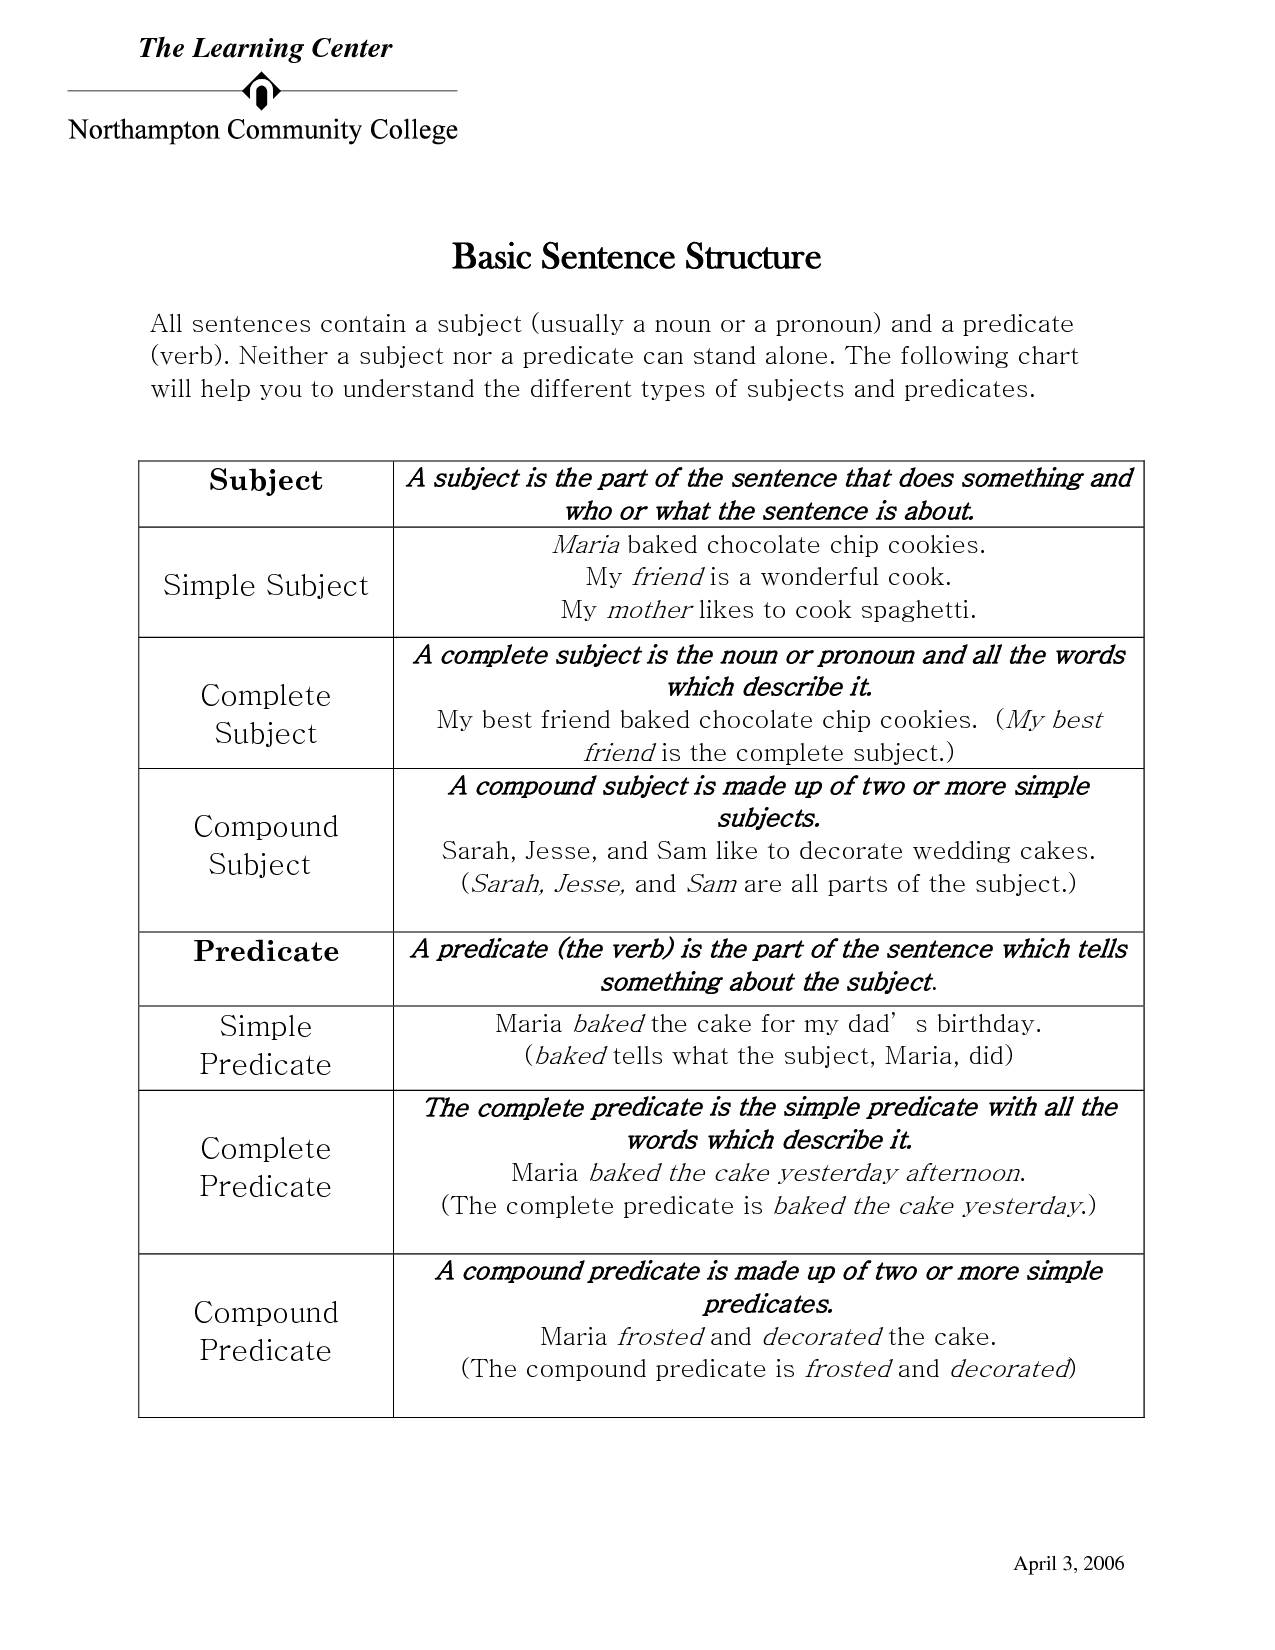 15 Best Images Of Basic Sentence Structure Worksheets Printable Sentence Structure Worksheets